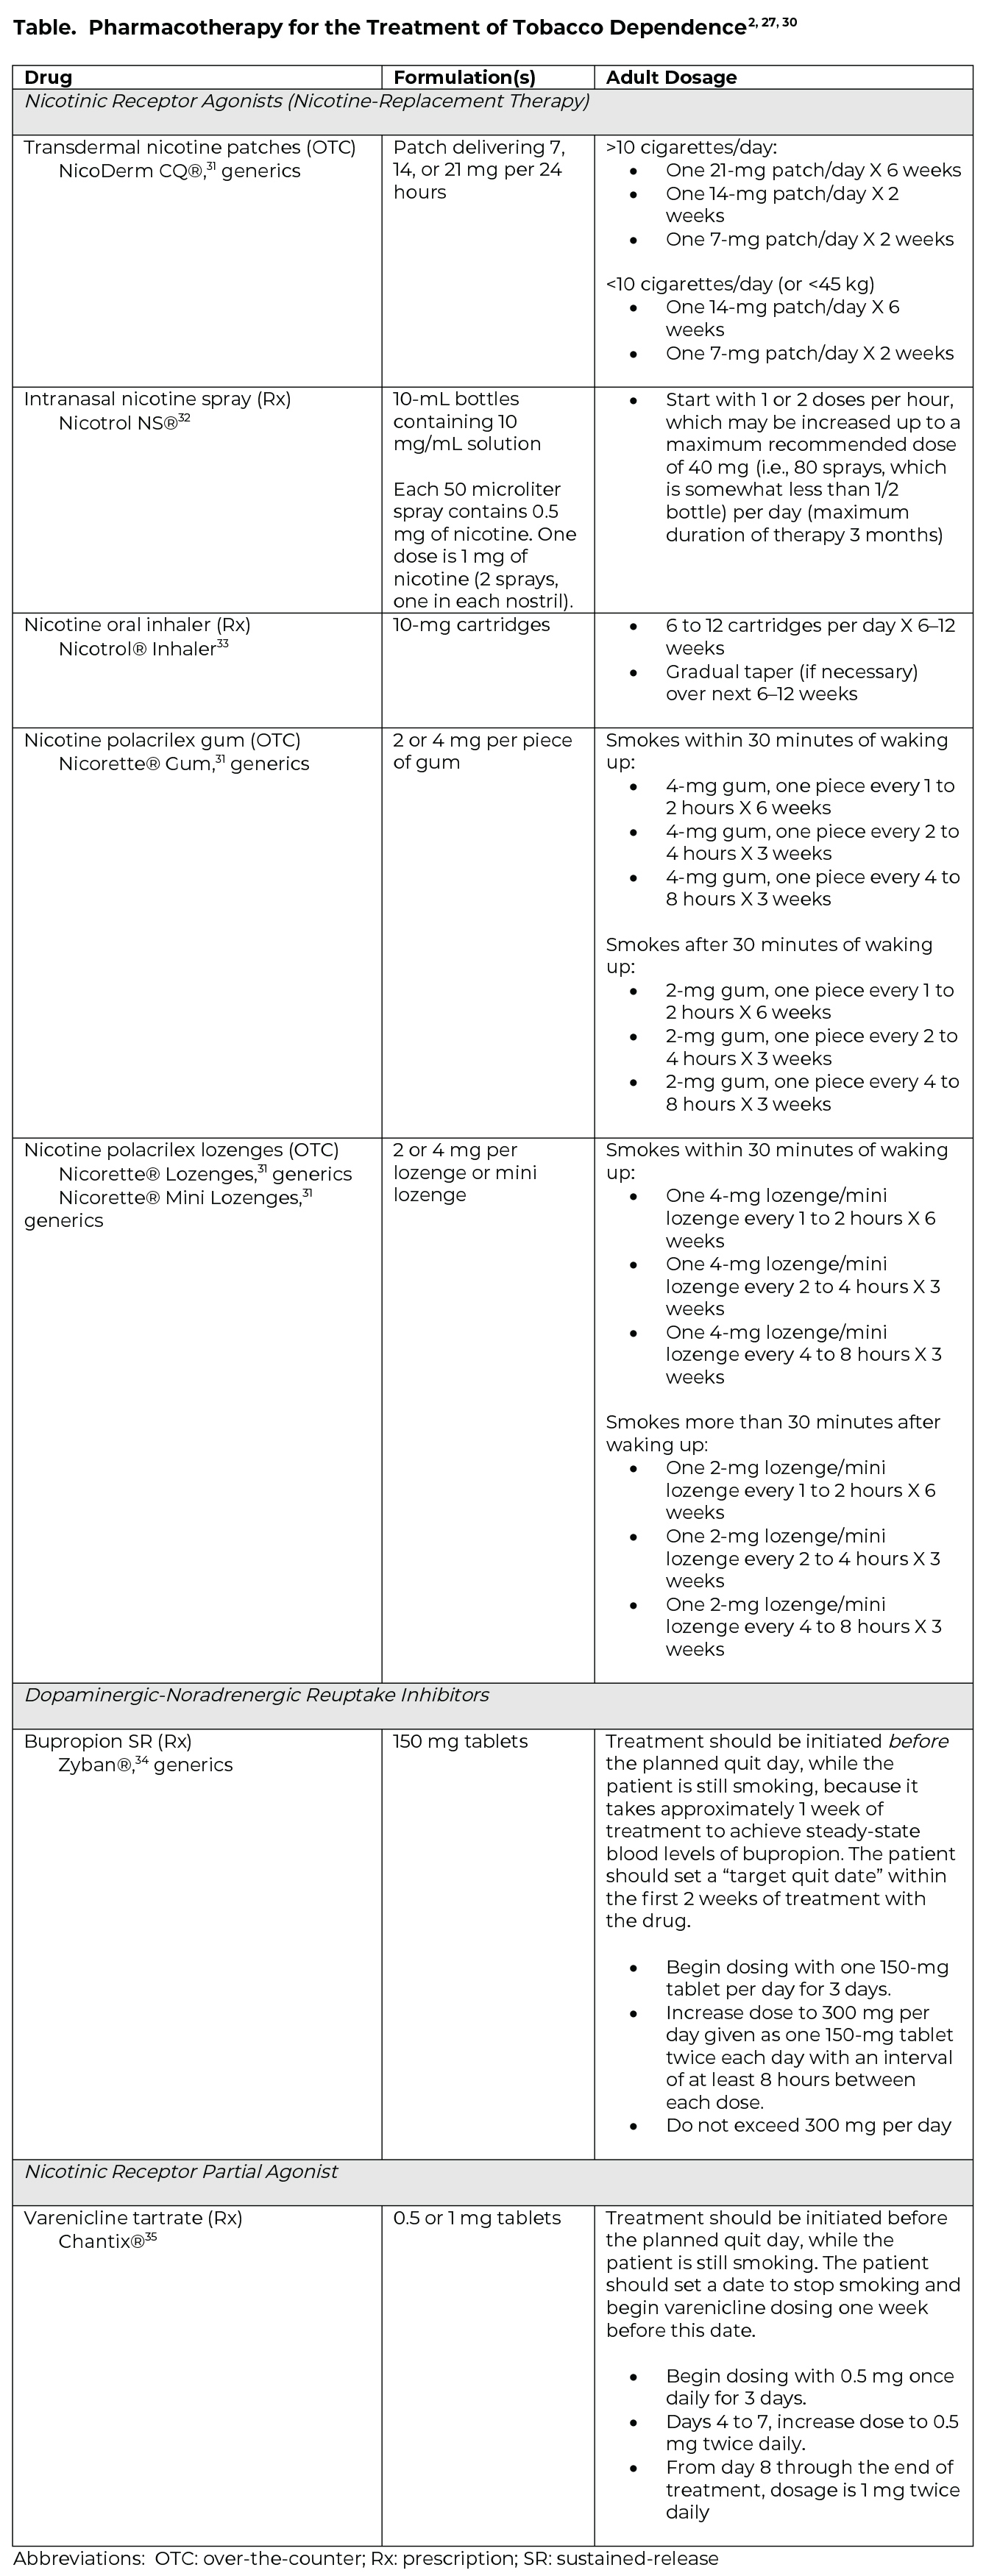 An image of Table. Pharmacotherapy for the Treatment of Tobacco Dependence